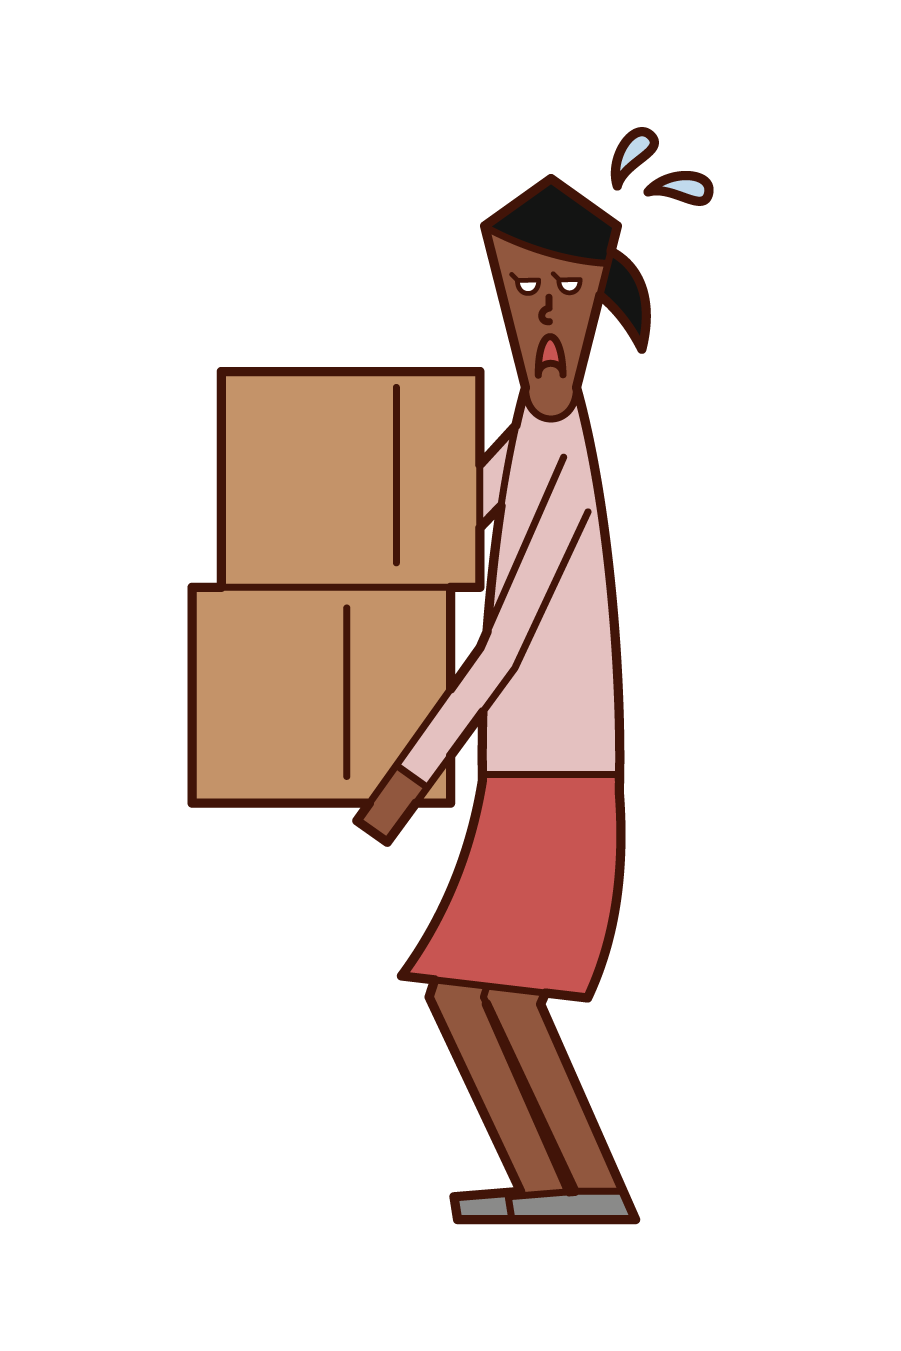 Illustration of a woman carrying heavy baggage